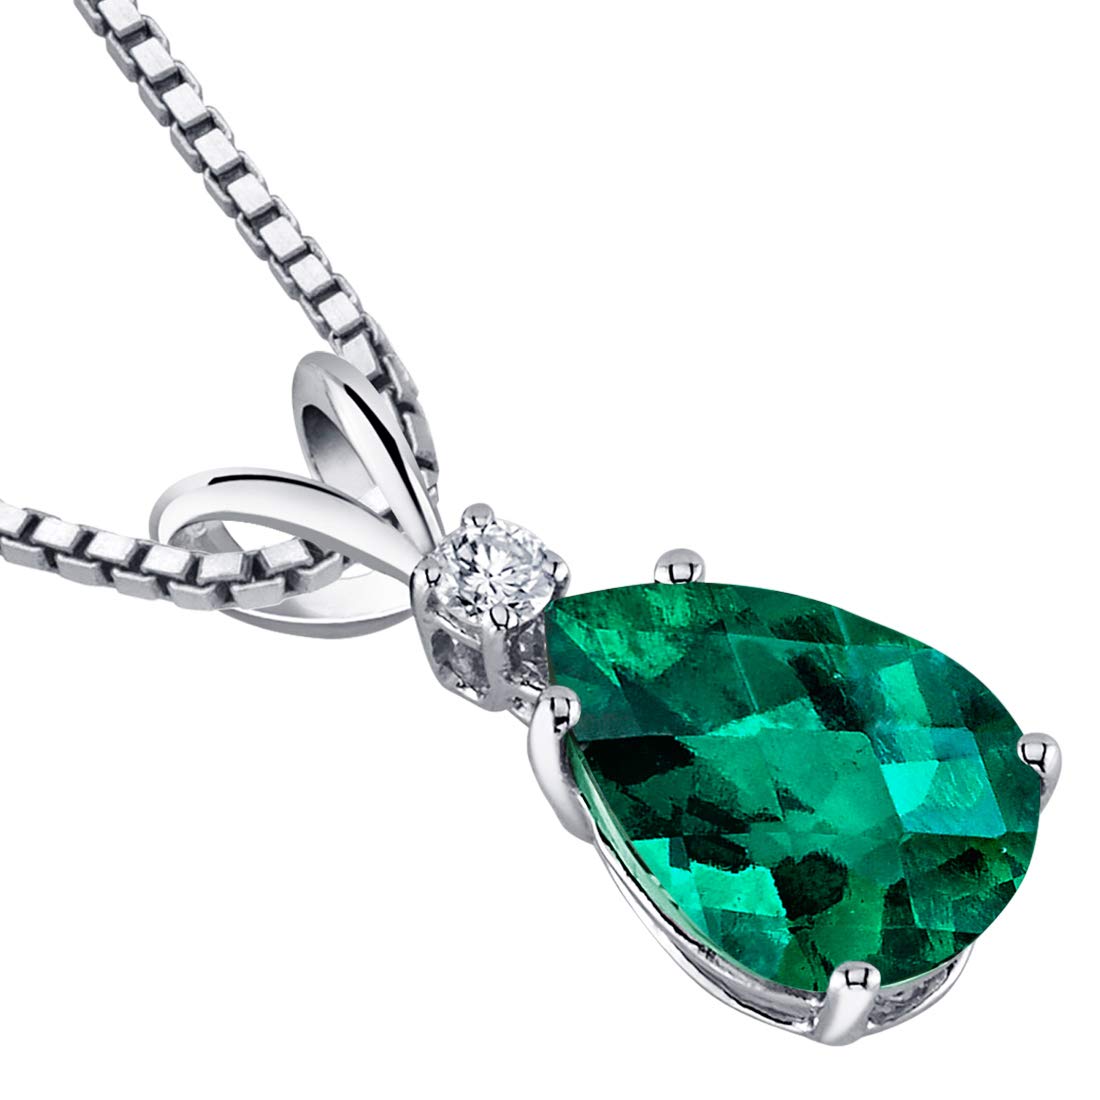 Peora Created Emerald with Genuine Diamond Pendant for Women 14K White Gold, Elegant Teardrop Solitaire, Pear Shape, 10x7mm, 1.75 Carats total